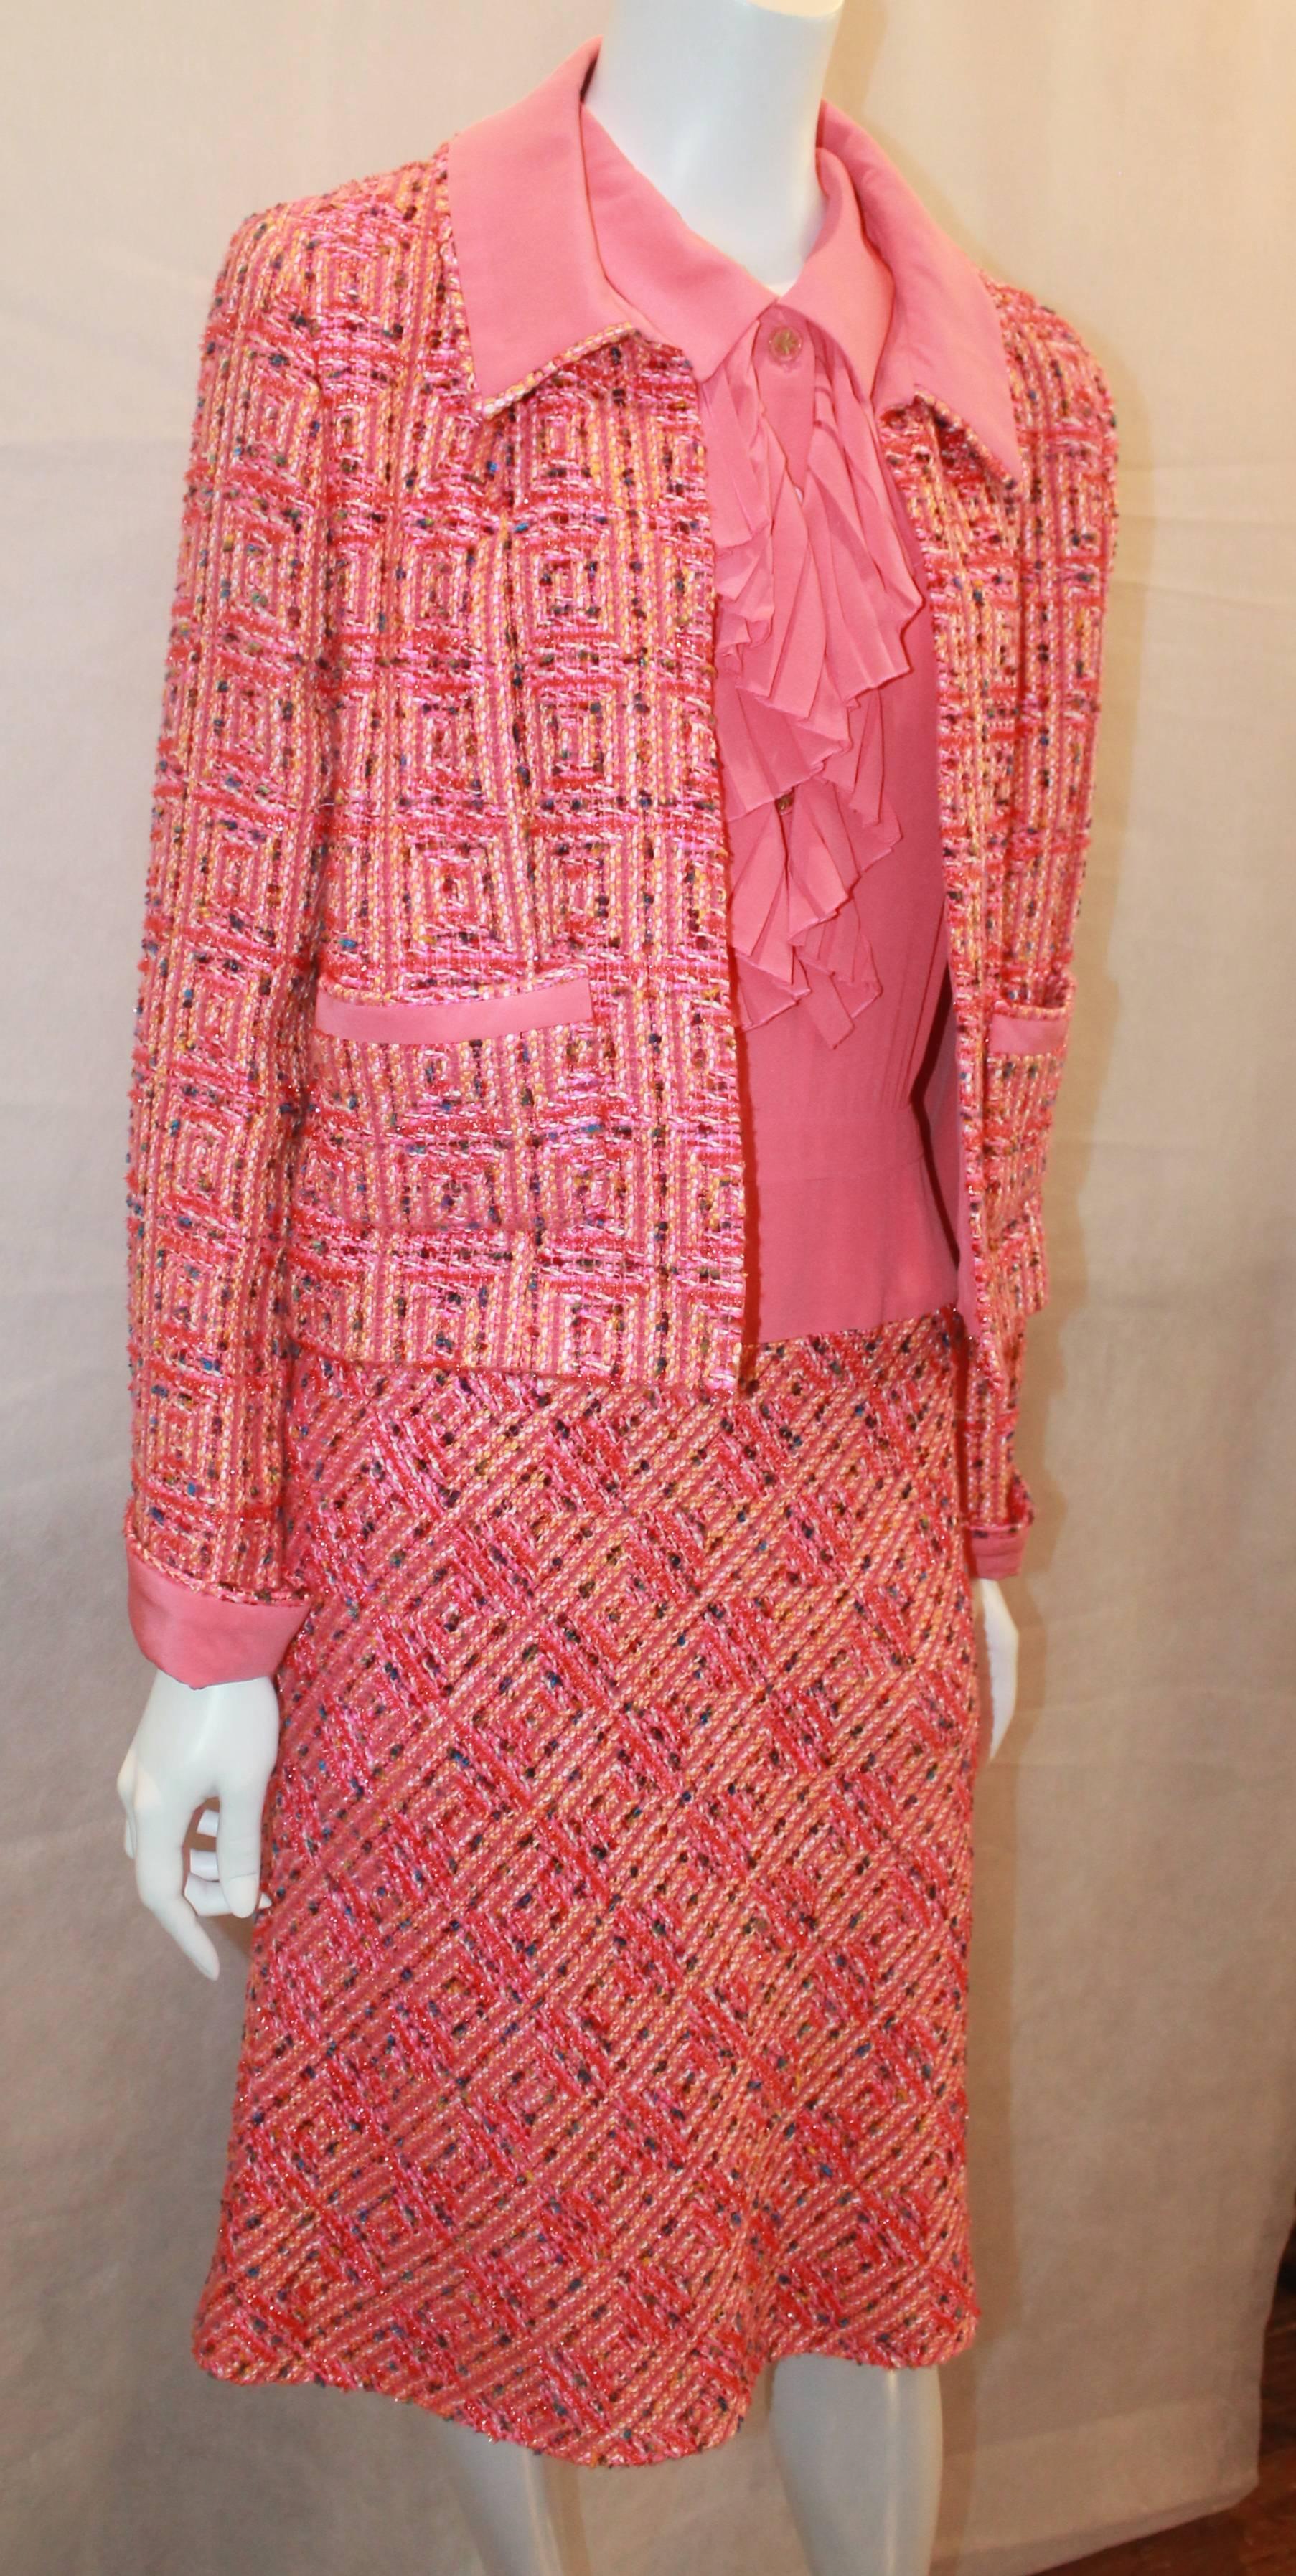 Chanel Pink & Multi-color Tweed and Dress & Jacket Set - 40 - 01C. These piece are perfect for a collector and are in excellent condition. The tweed is mainly a peach stitched in with metallic blue, purple, green, and yellow. The blouse sleeveless